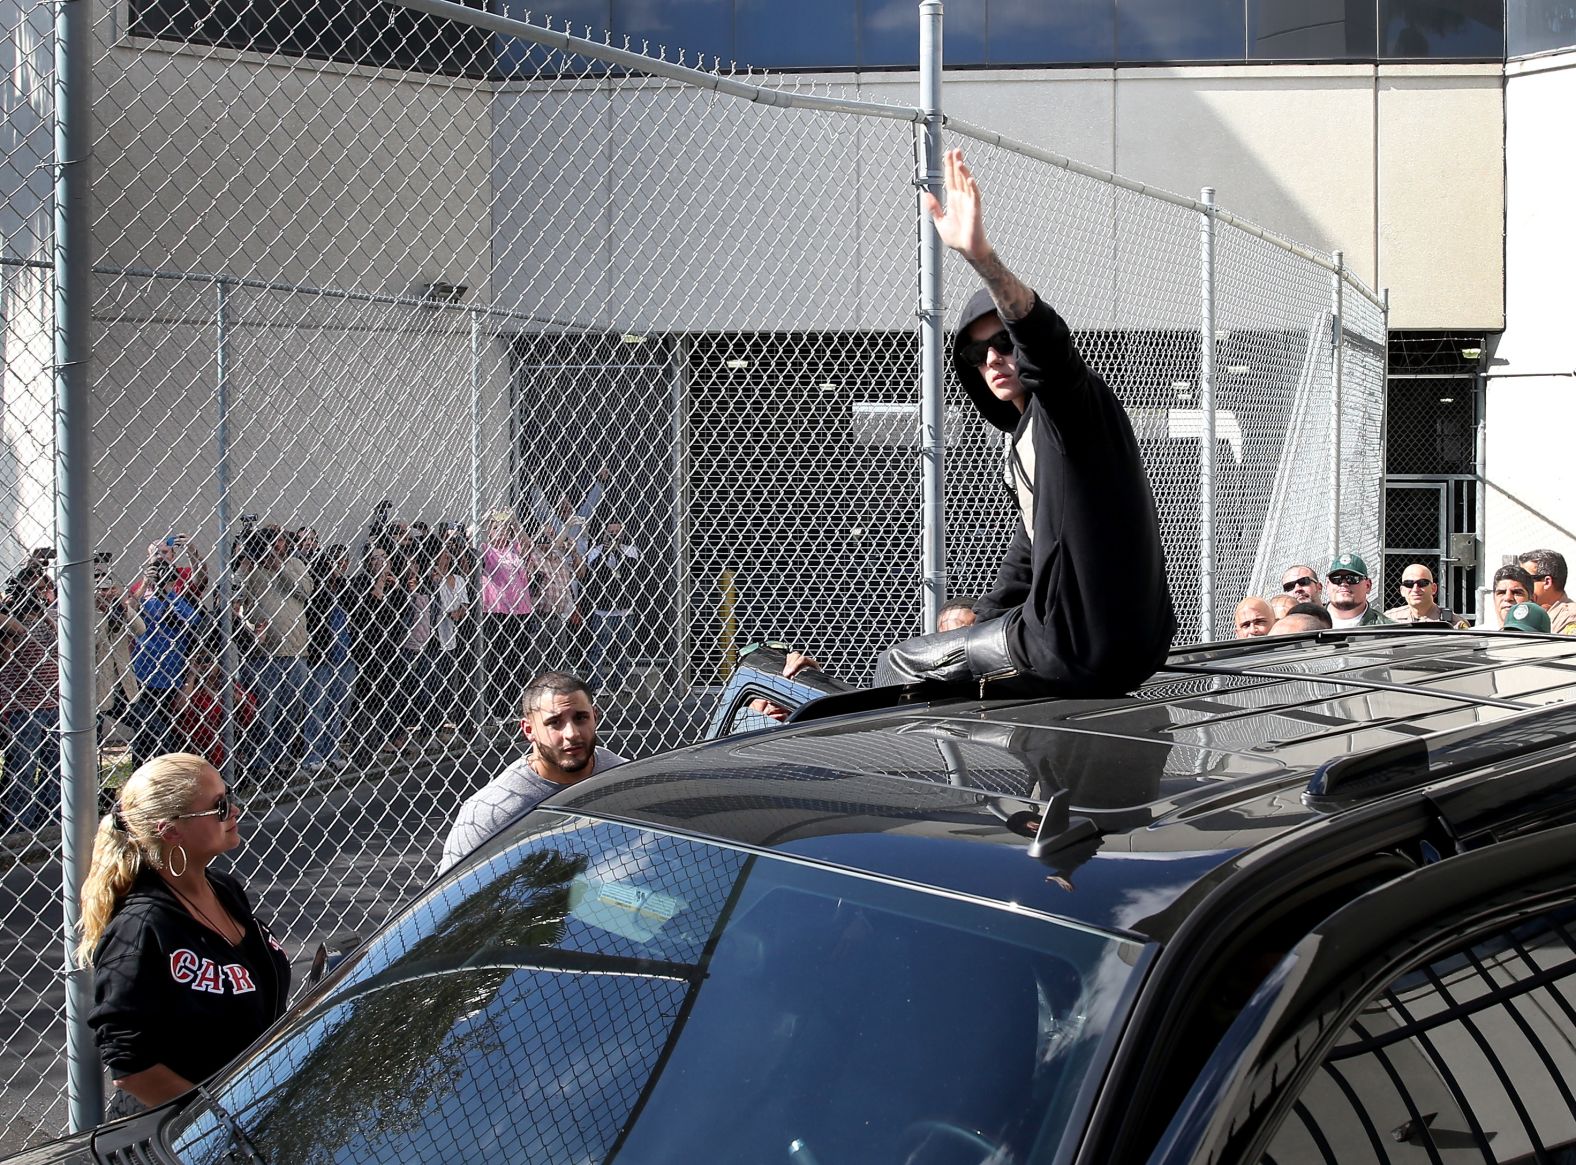 Bieber waves after exiting the correctional center following his arrest. Earlier that month, sheriff's deputies searched his California home over the egging of a neighbor's house. <a href="https://www.cnn.com/2014/07/09/showbiz/justin-bieber-vandalism/" target="_blank">Bieber later accepted a plea deal</a> to settle a misdemeanor vandalism charge.